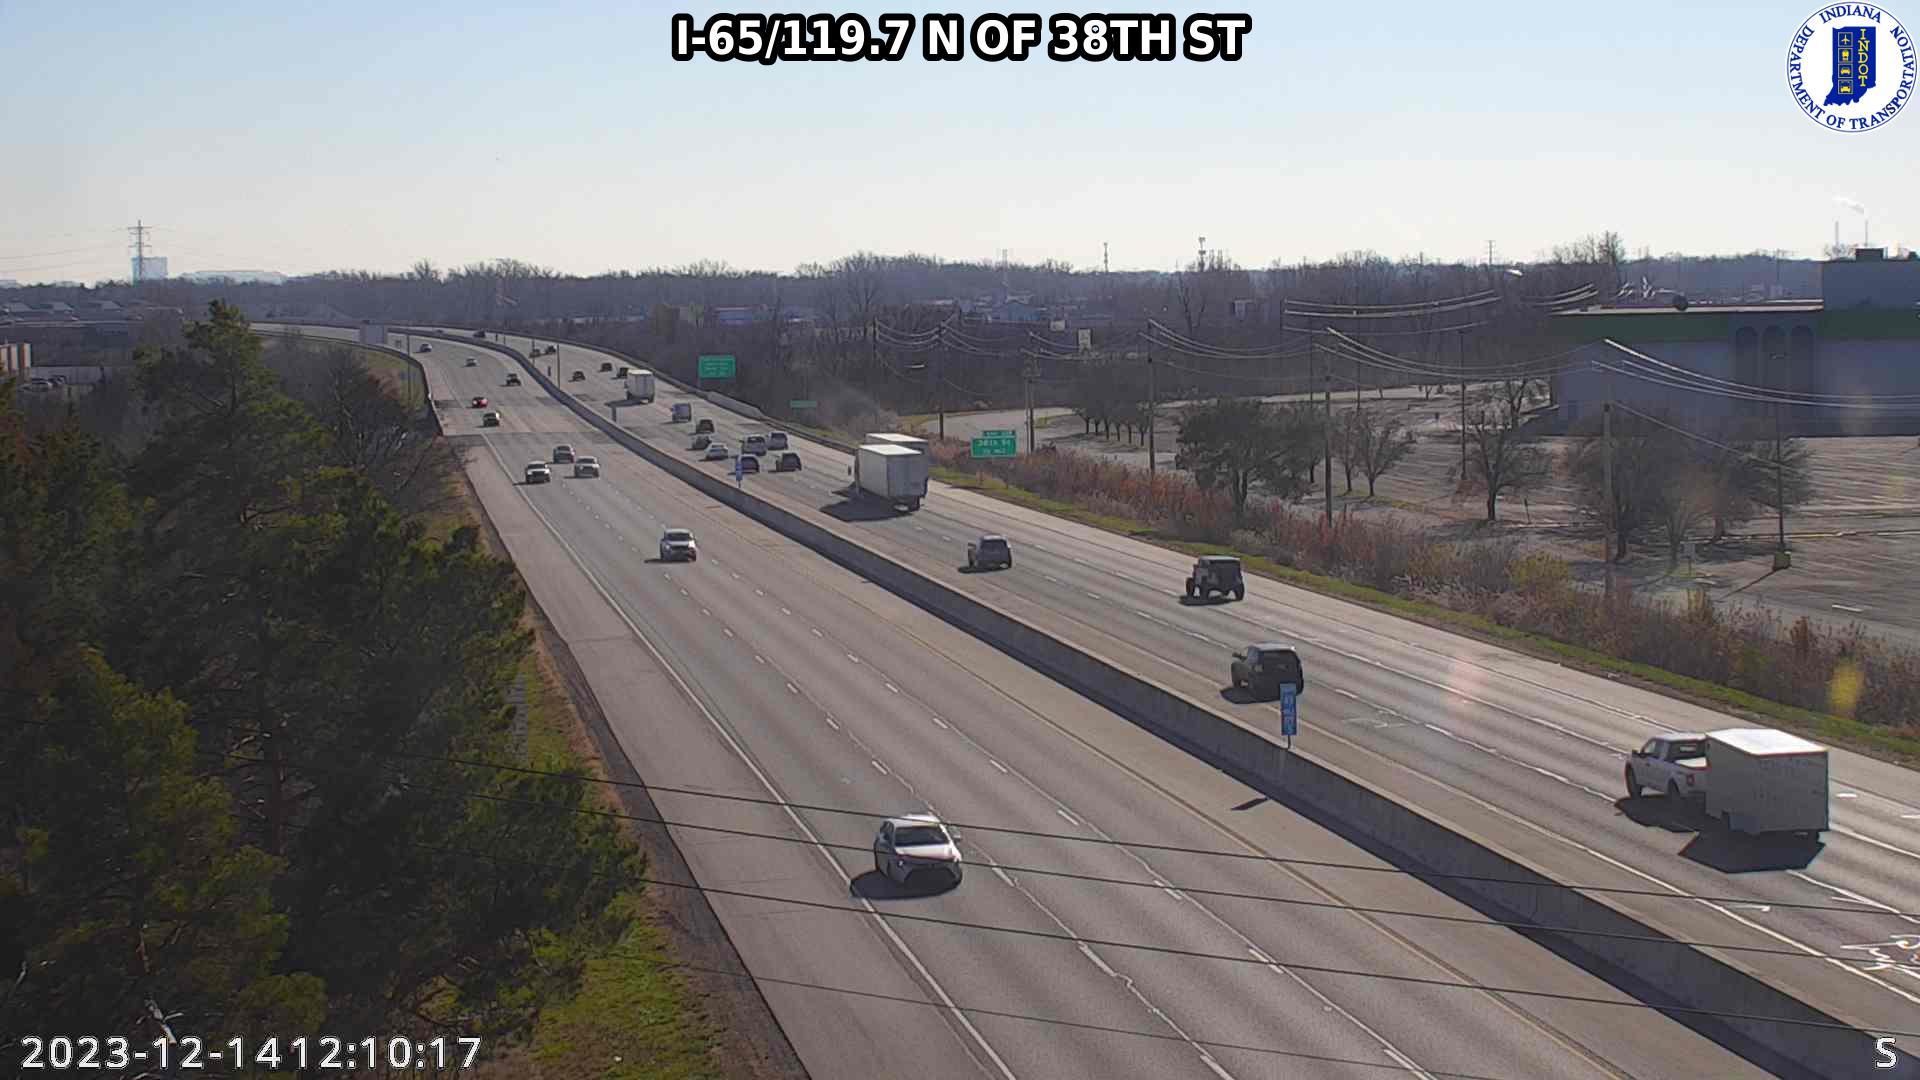 Traffic Cam Indianapolis: I-65: I-65/119.7 N OF 38TH ST